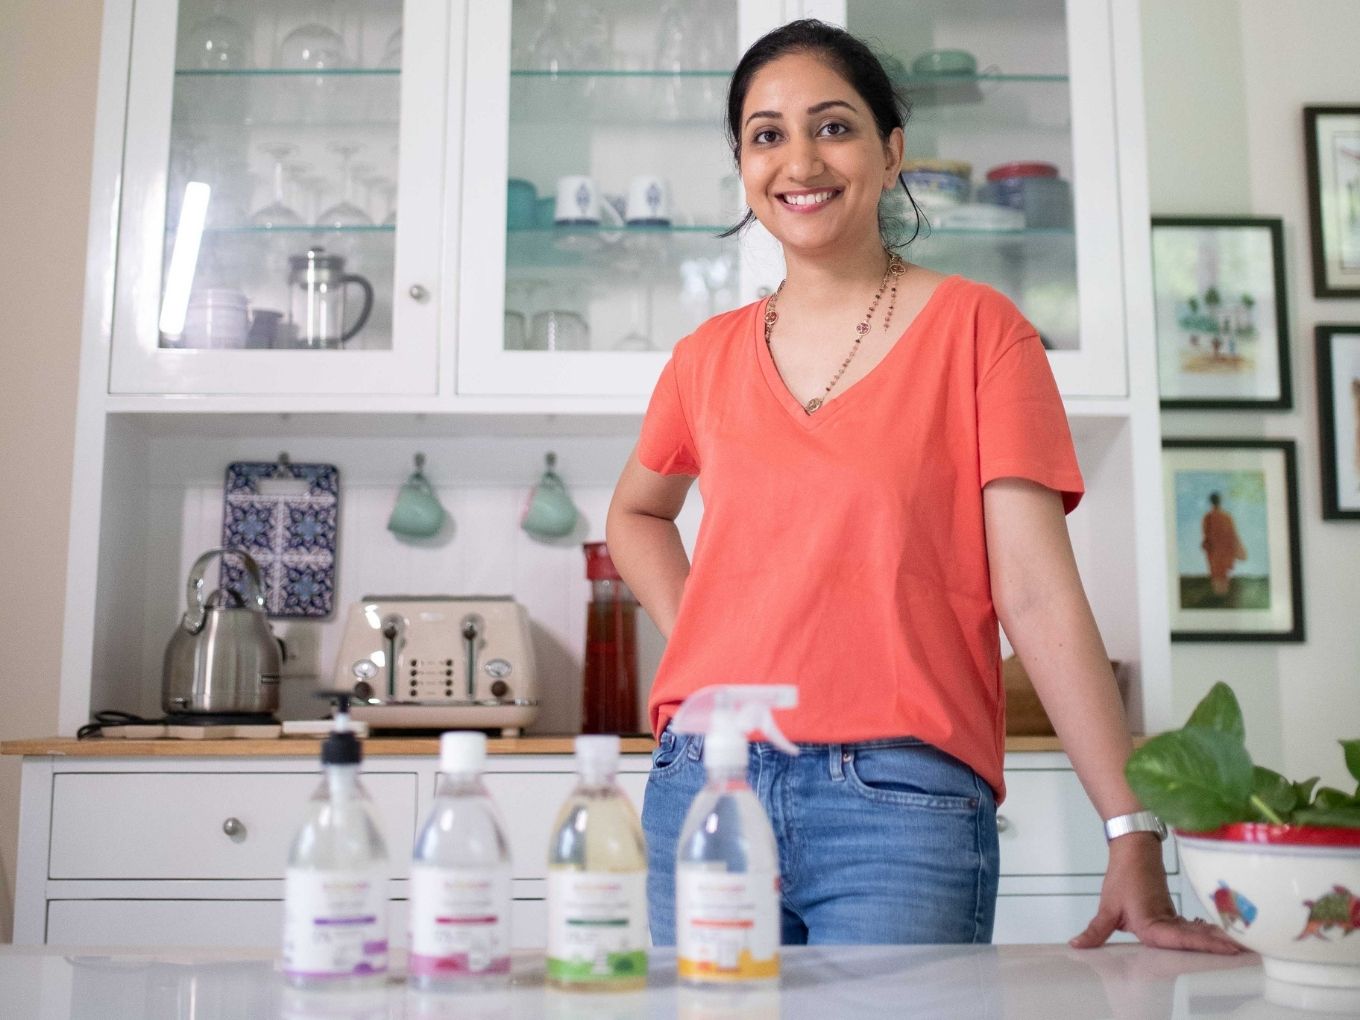 Timing Is Everything: Why A Former McKinsey & Star Exec Ventured Into Home Hygiene Products